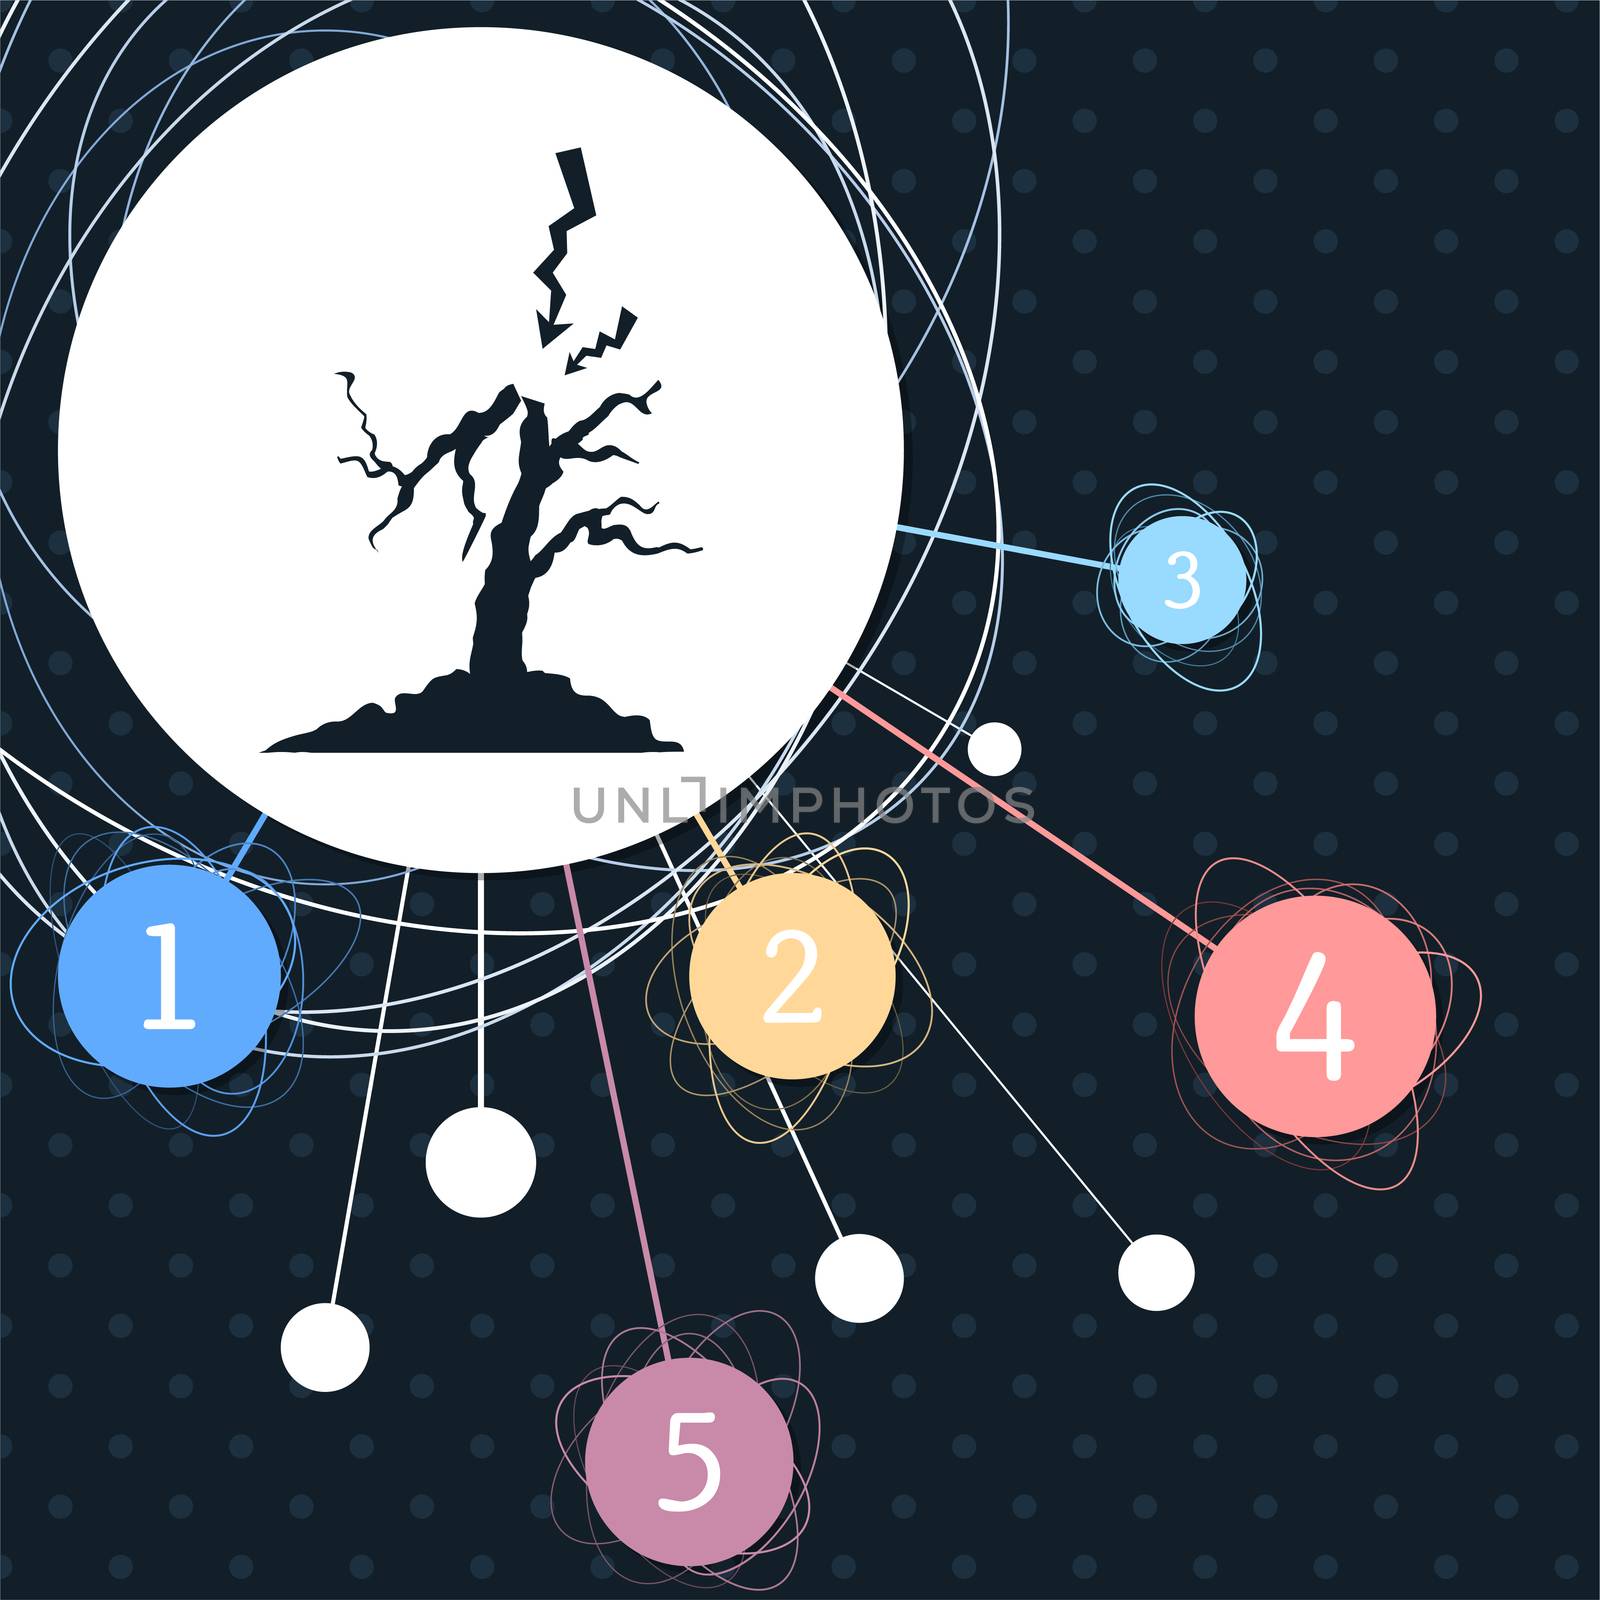 lightning and tree icon with the background to the point infographic style.  by Adamchuk